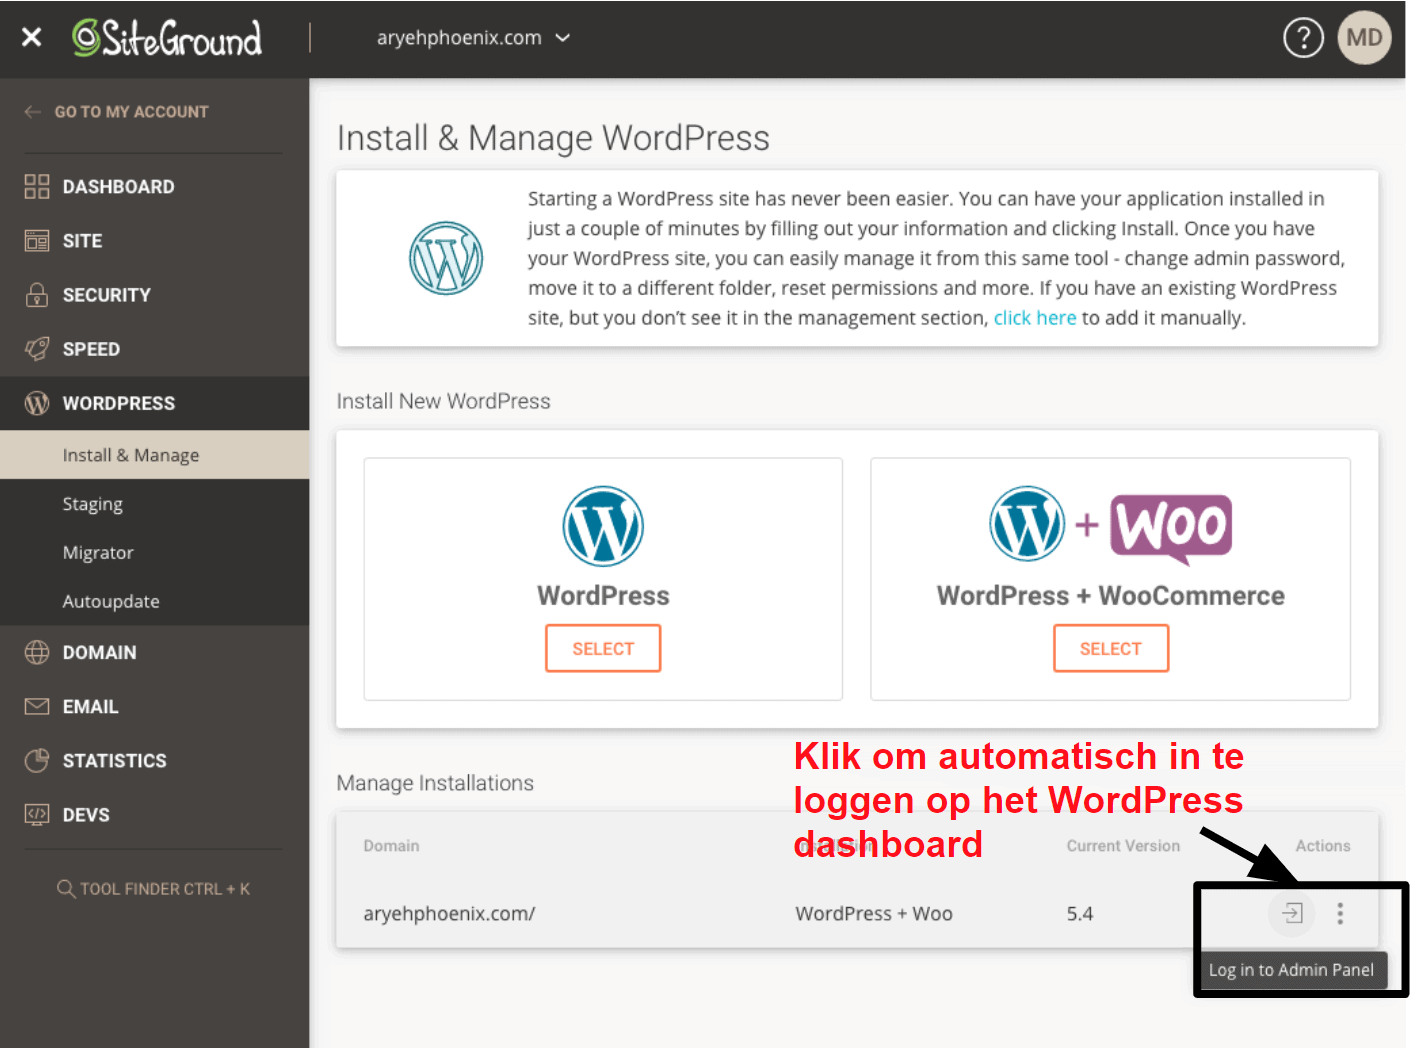 SiteGround offers a one click login option for your WordPress dashboard NL15 1